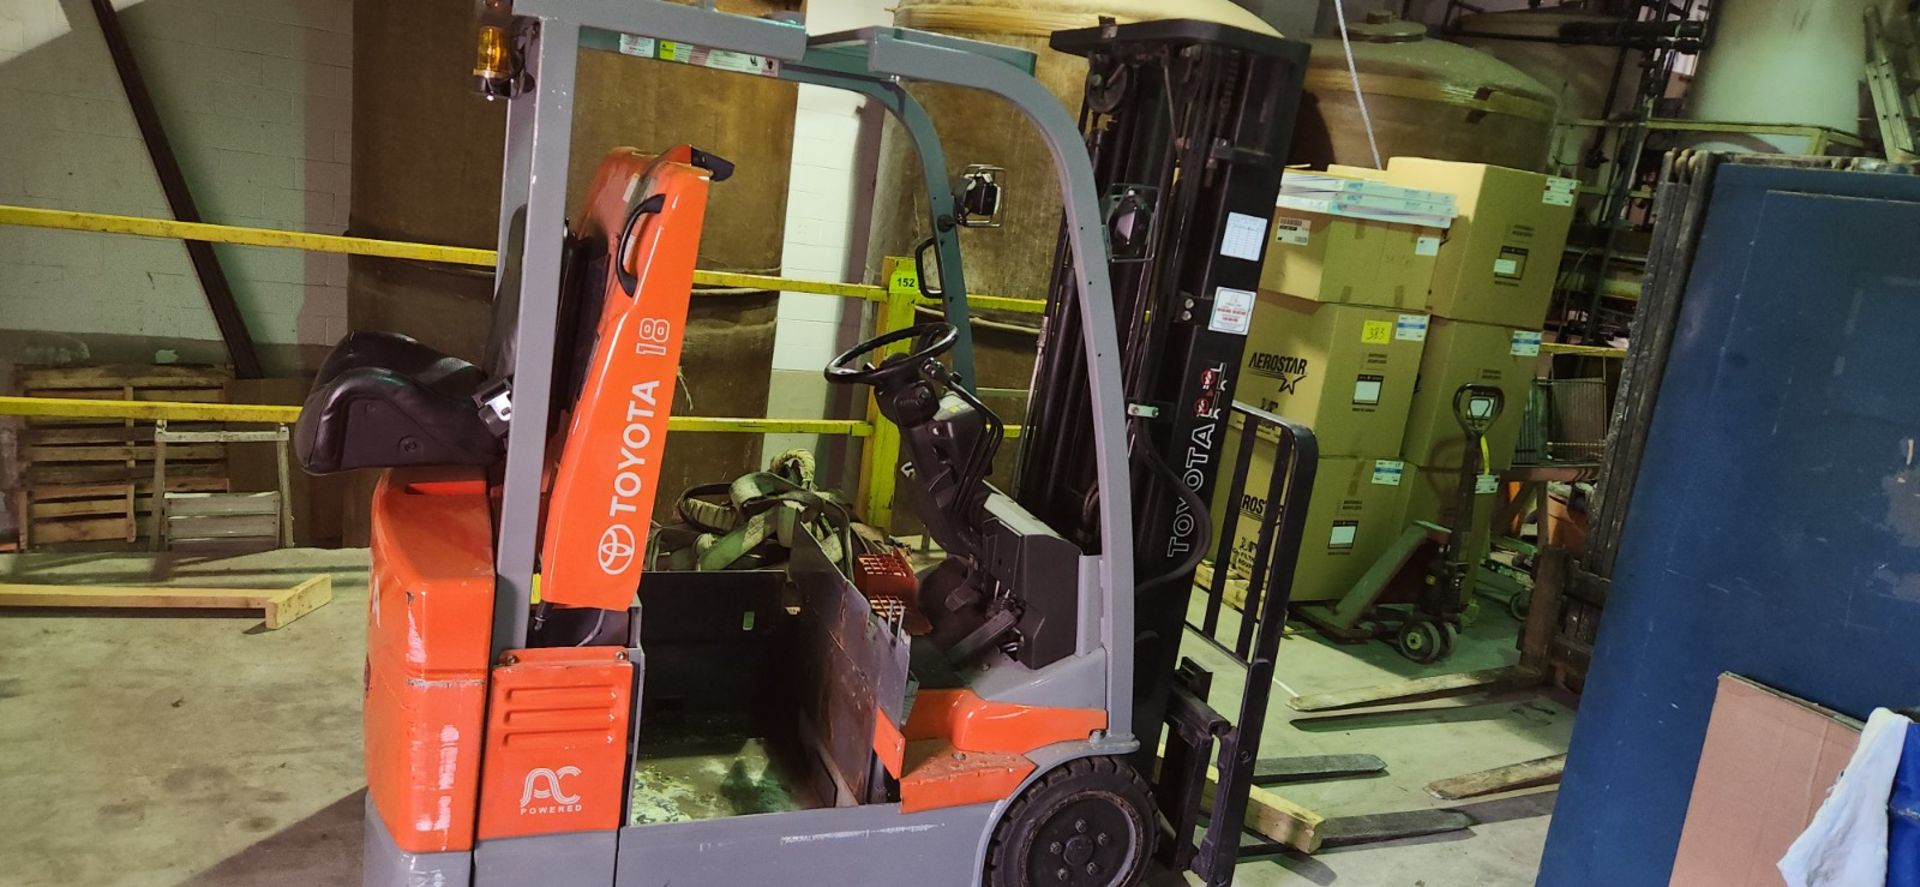 TOYOTA 7FBEU18 ELECTRIC FORKLIFT, S/N 15433, 2,900LB CAP., 189" MAX LIFT, 3-STAGE MAST, SIDE - Image 7 of 14